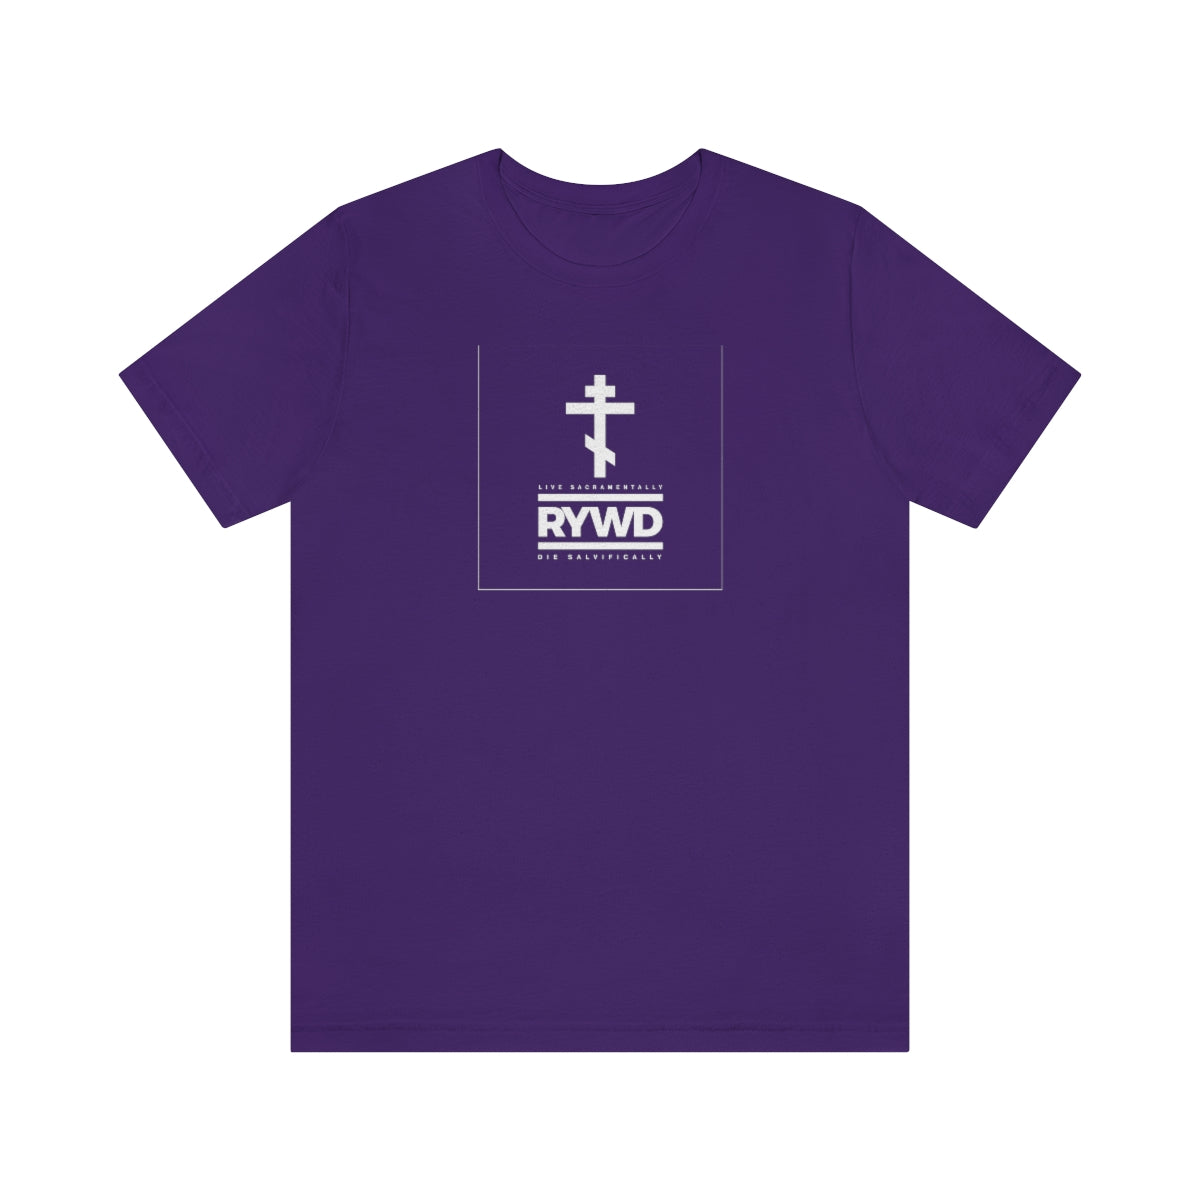 RYWD (Remember You Will Die) Logo Design No. 1 | Orthodox Christian T-Shirt